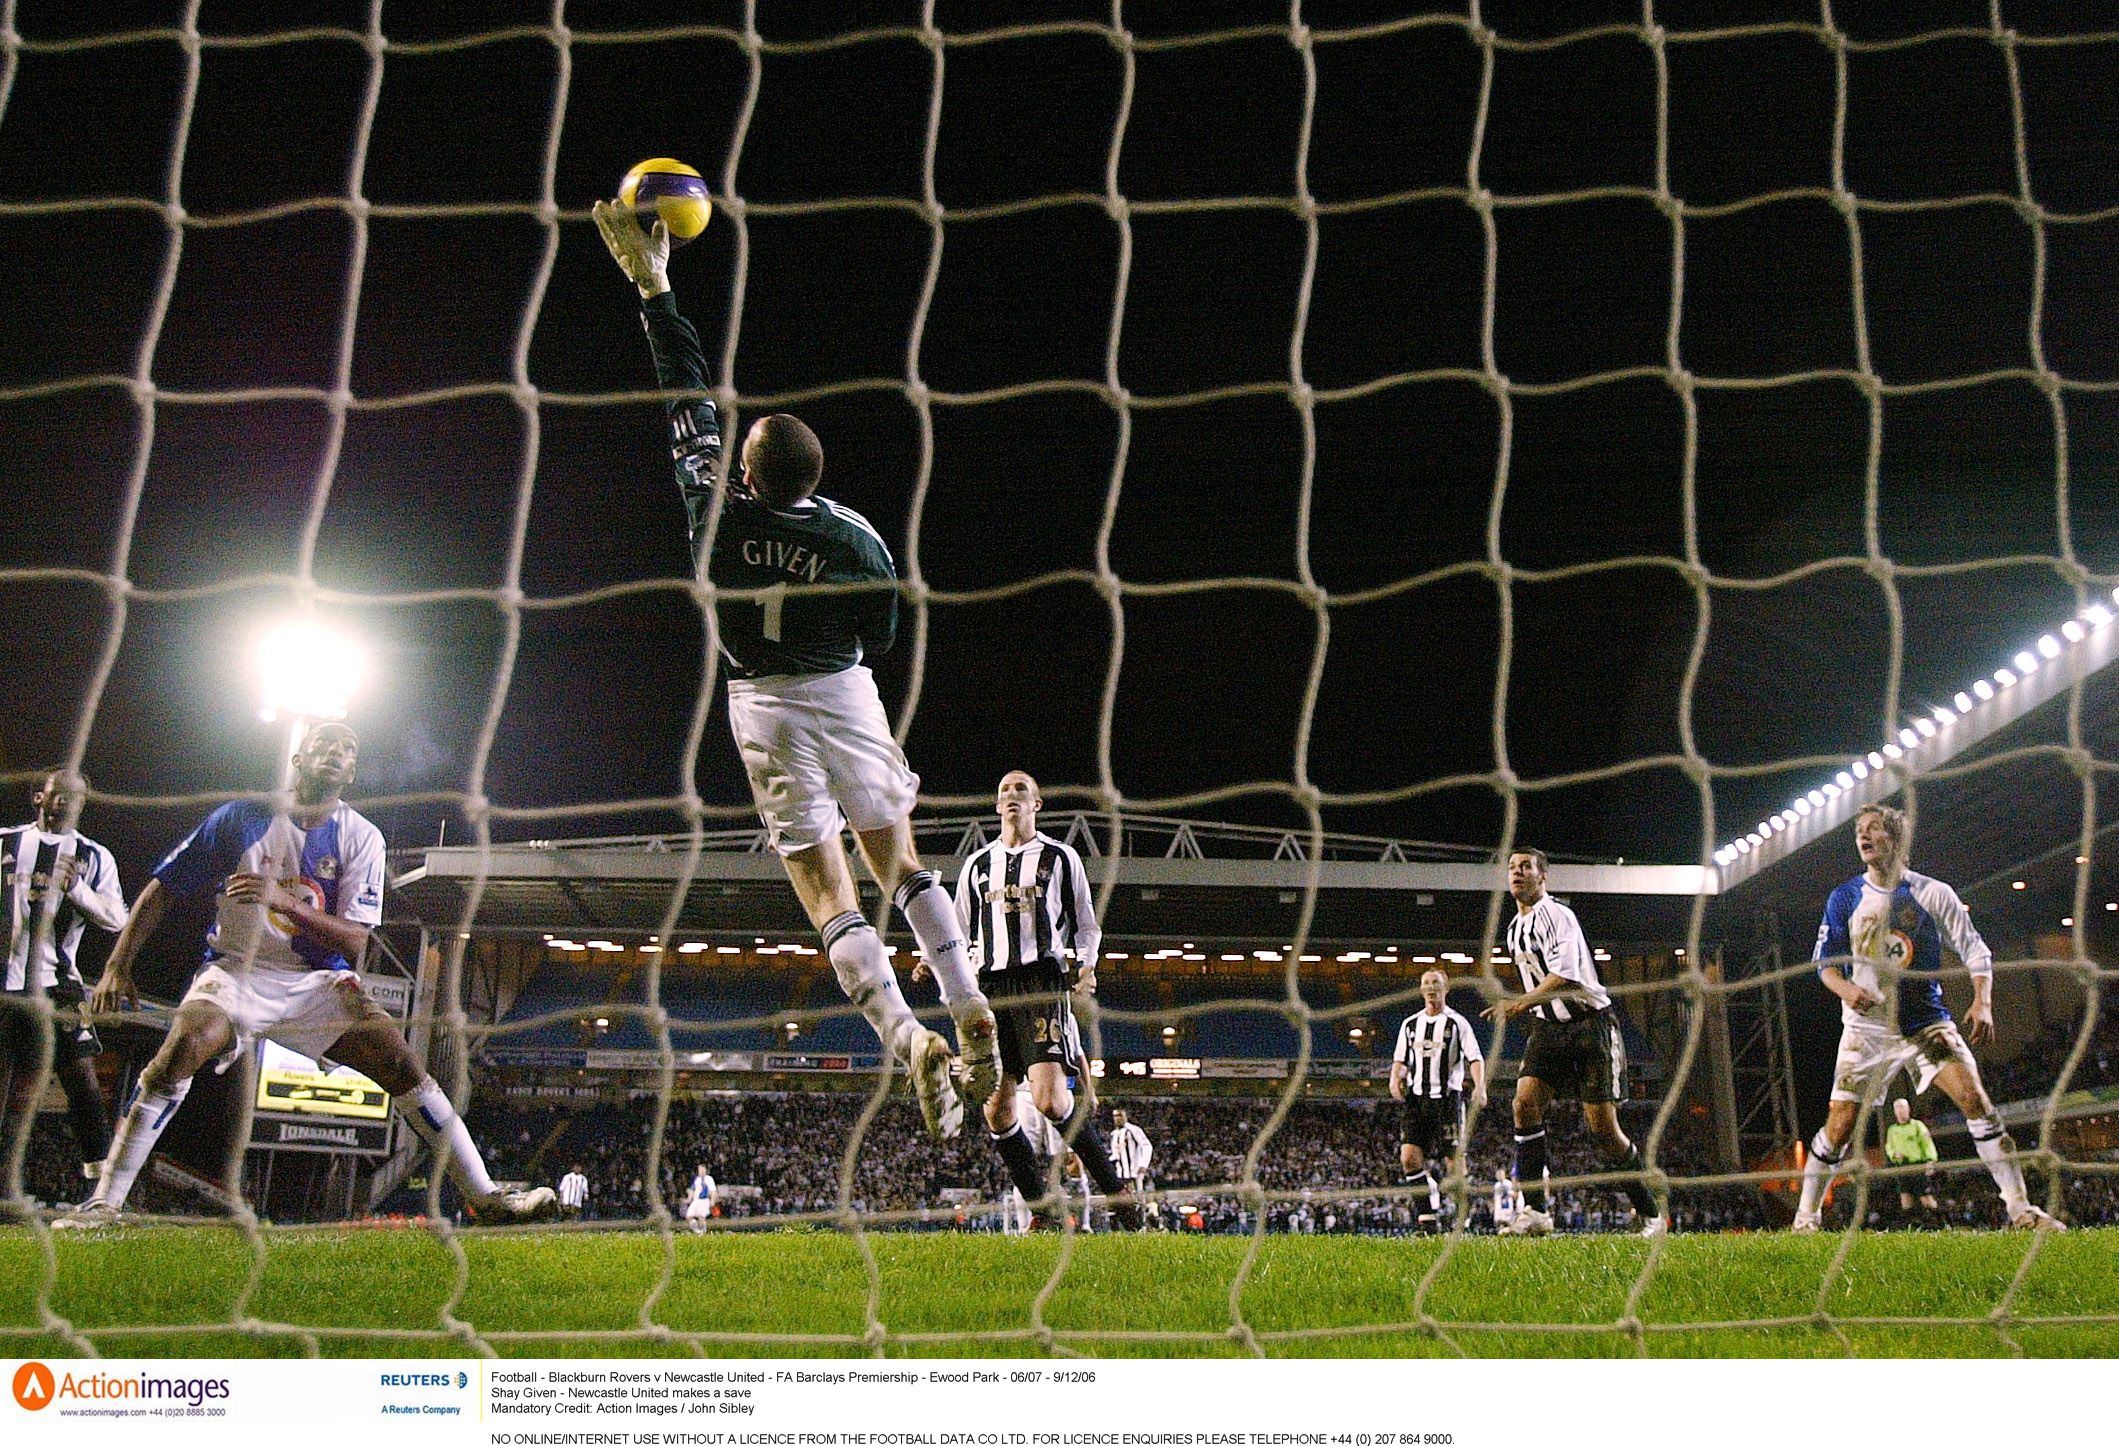 Shay Given of Newcastle makes a save against Blackburn Rovers 2006/07